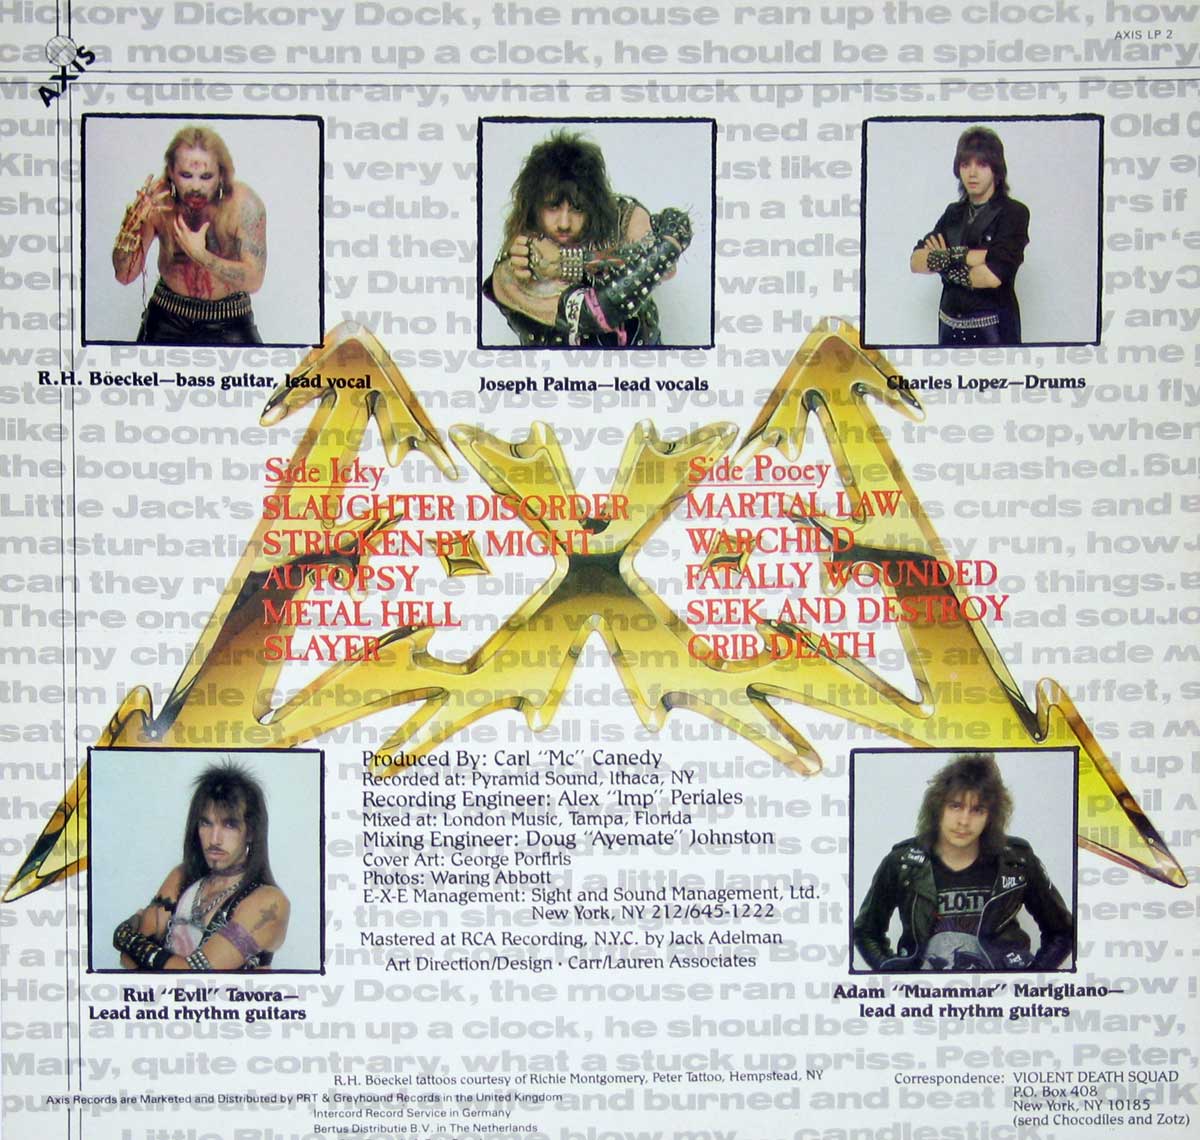 Back Cover  Photo of "EXE - Stricken by Might" Album